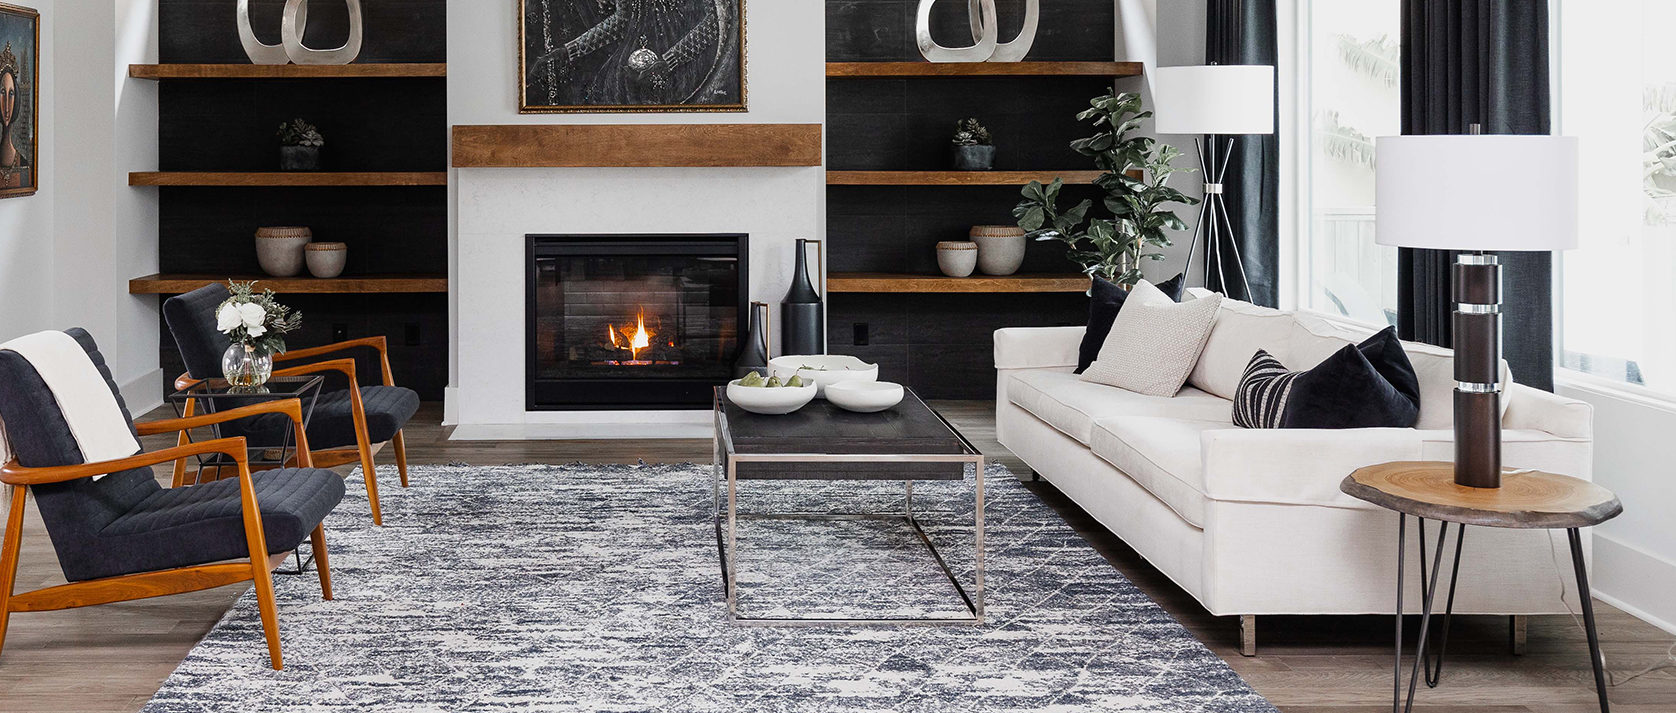 6 Top Tips to Refresh Your Home Fireplace Decor